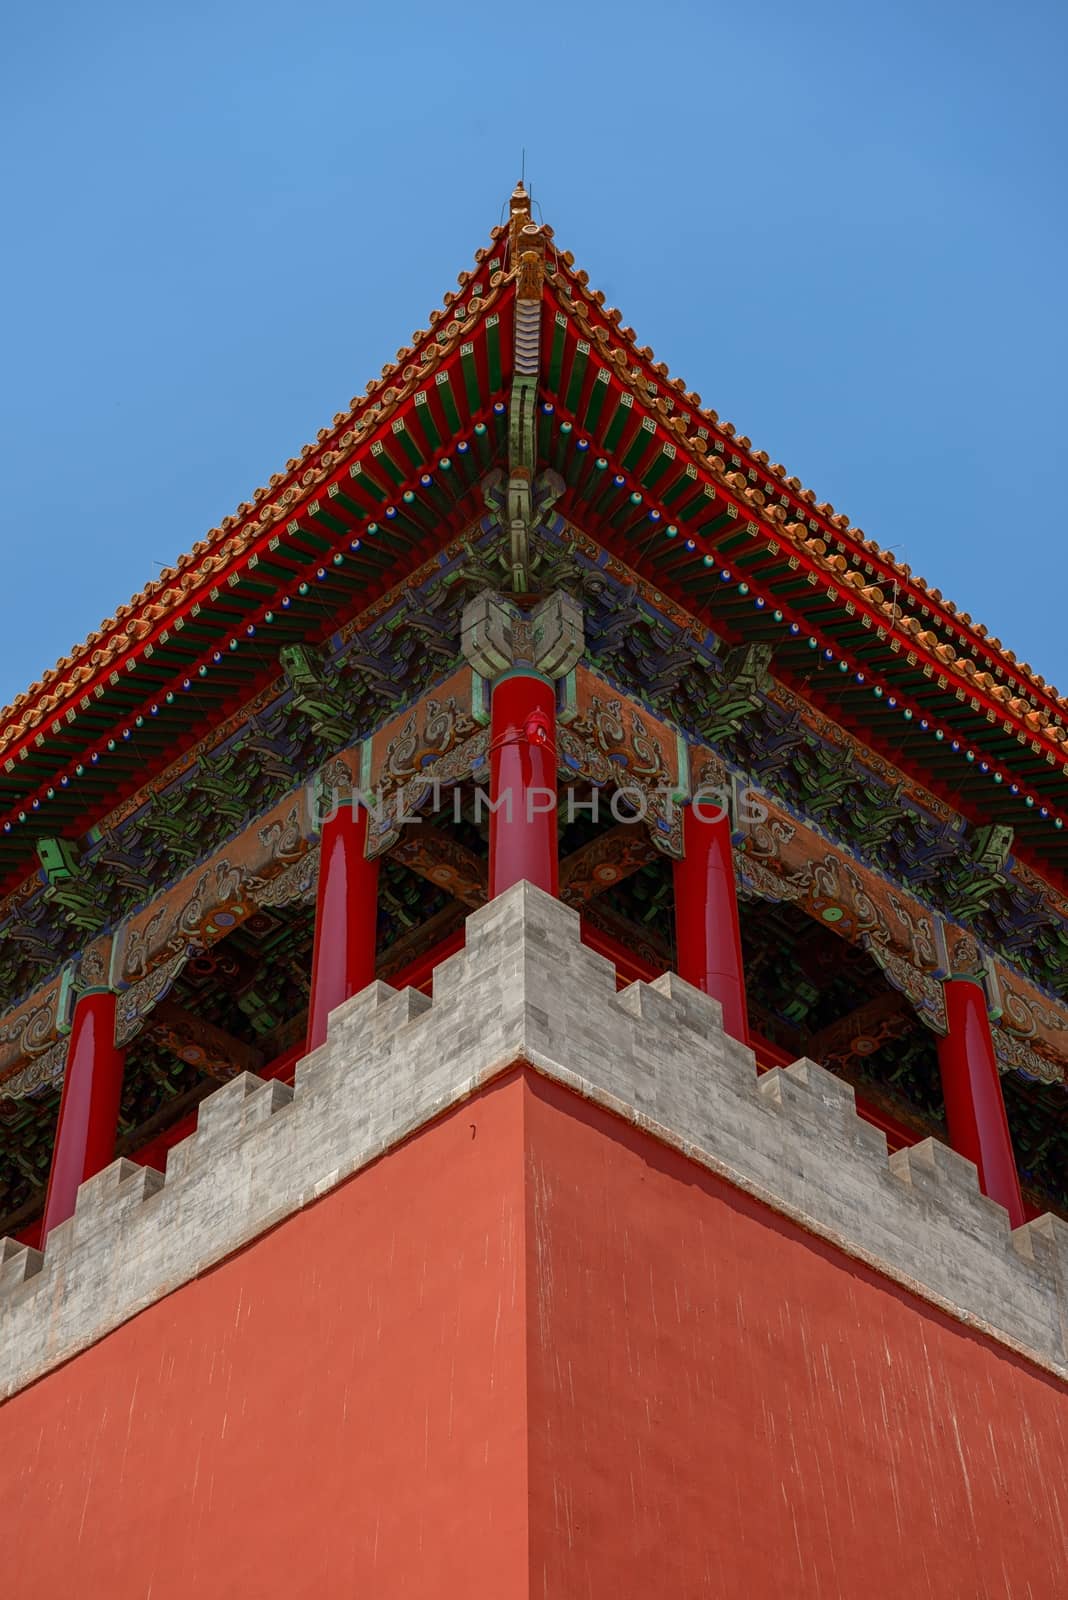 Old traditional Chinese building under blue sky